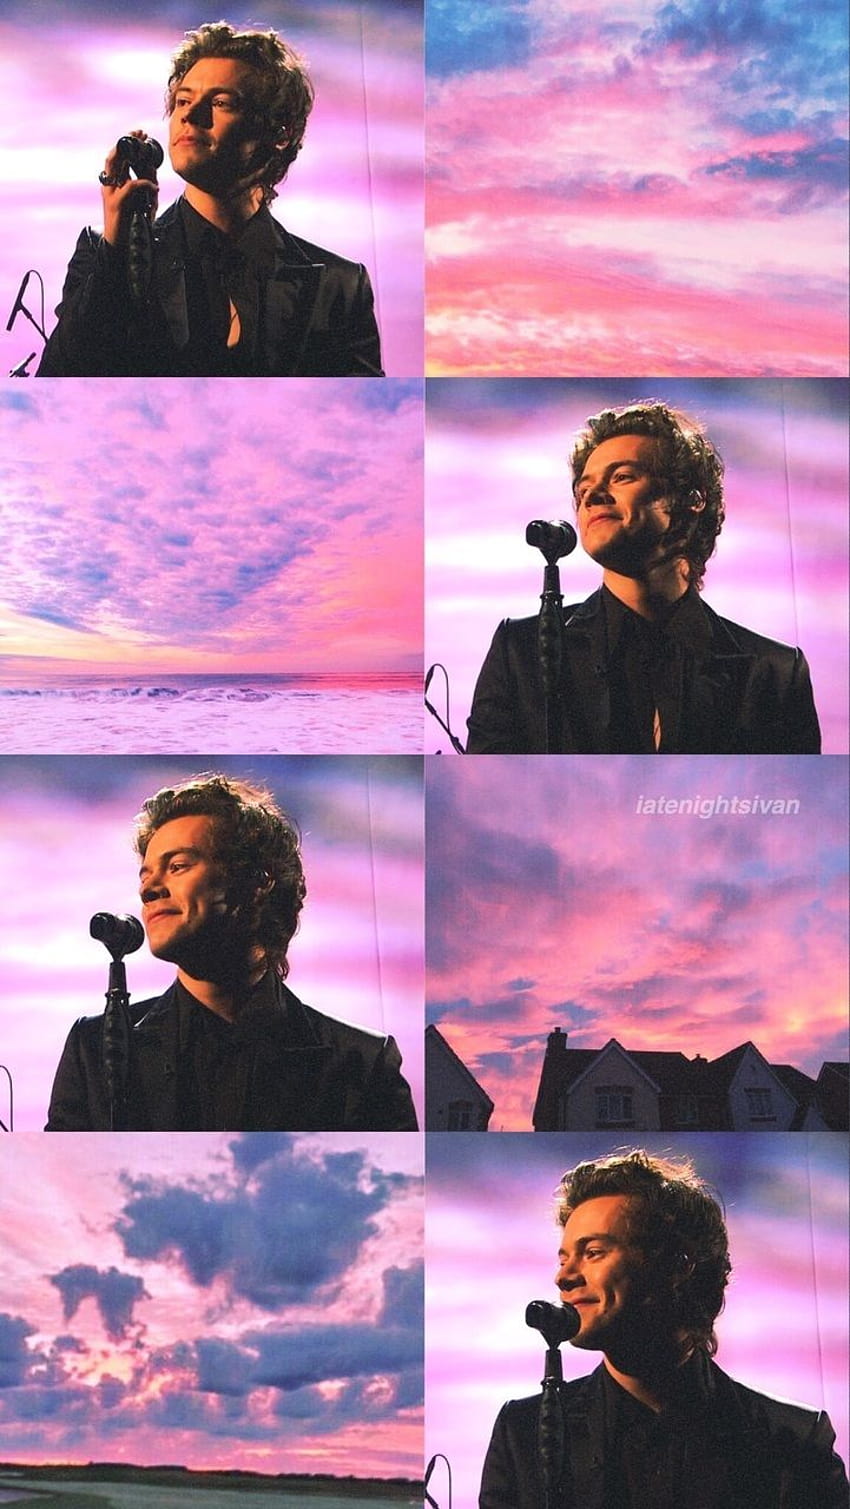 harry styles performing sign of the times on the graham norton show // follow me on twitter @iatenightsivan, one direction performing aesthetic HD phone wallpaper